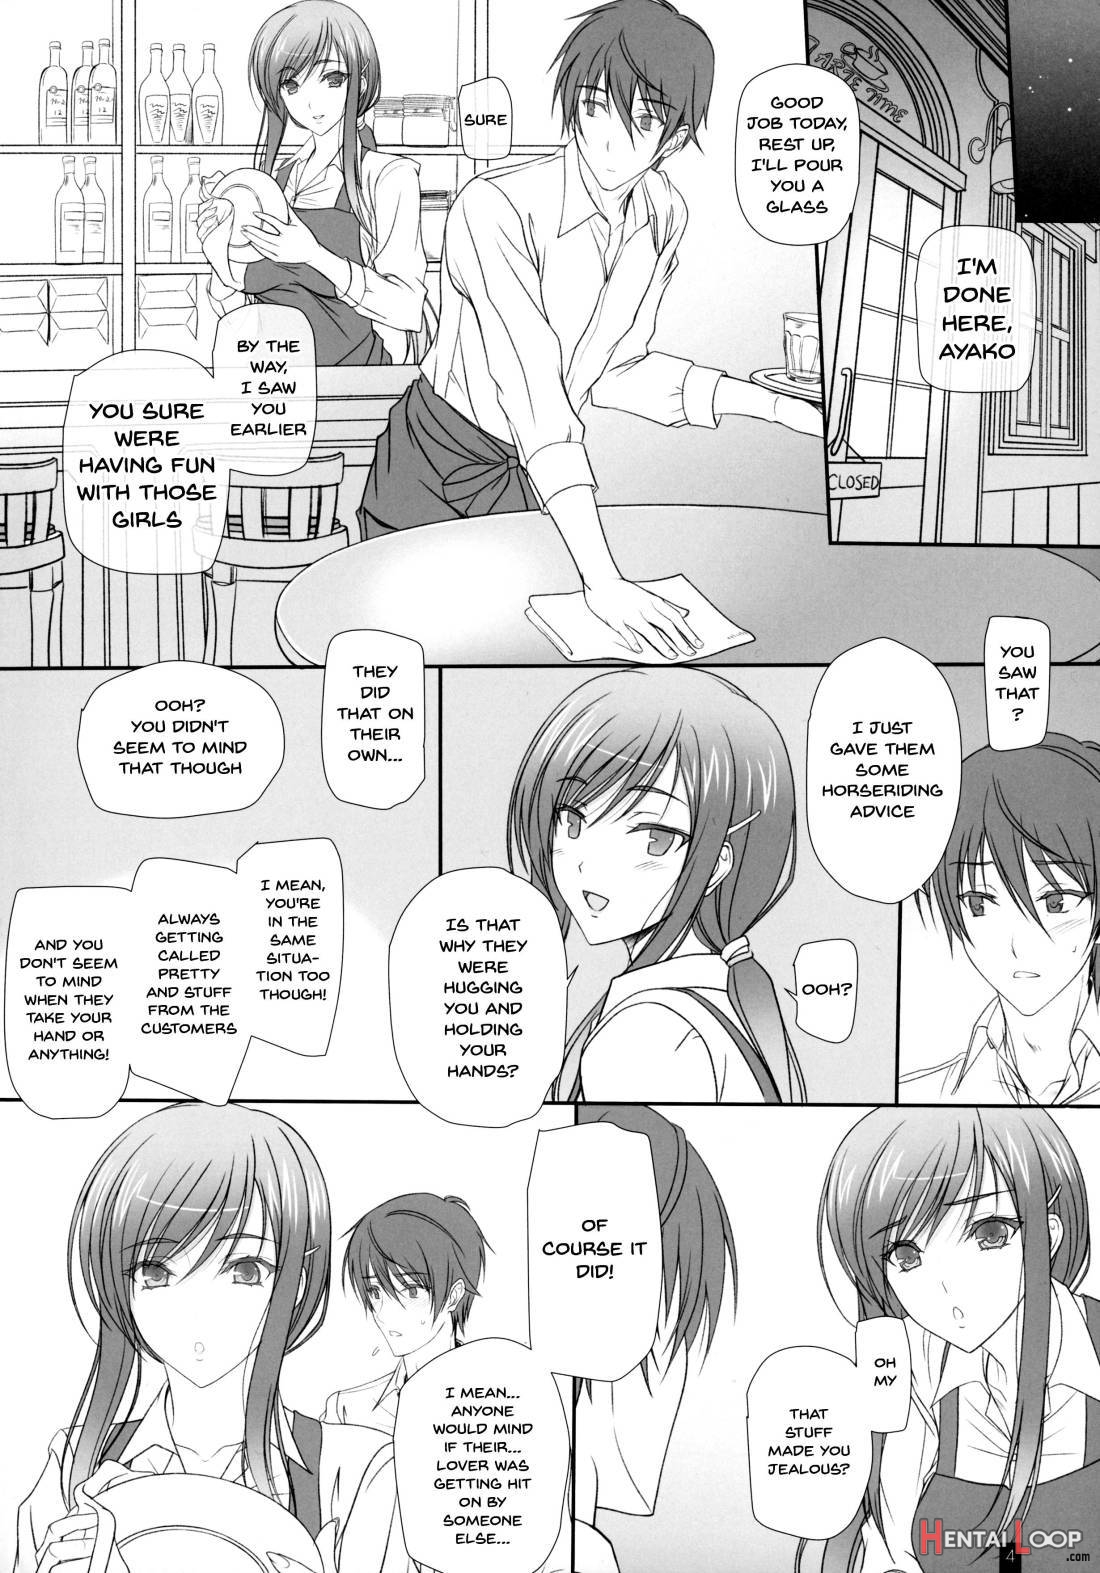 Oh! Ayako! More!&More!! page 3